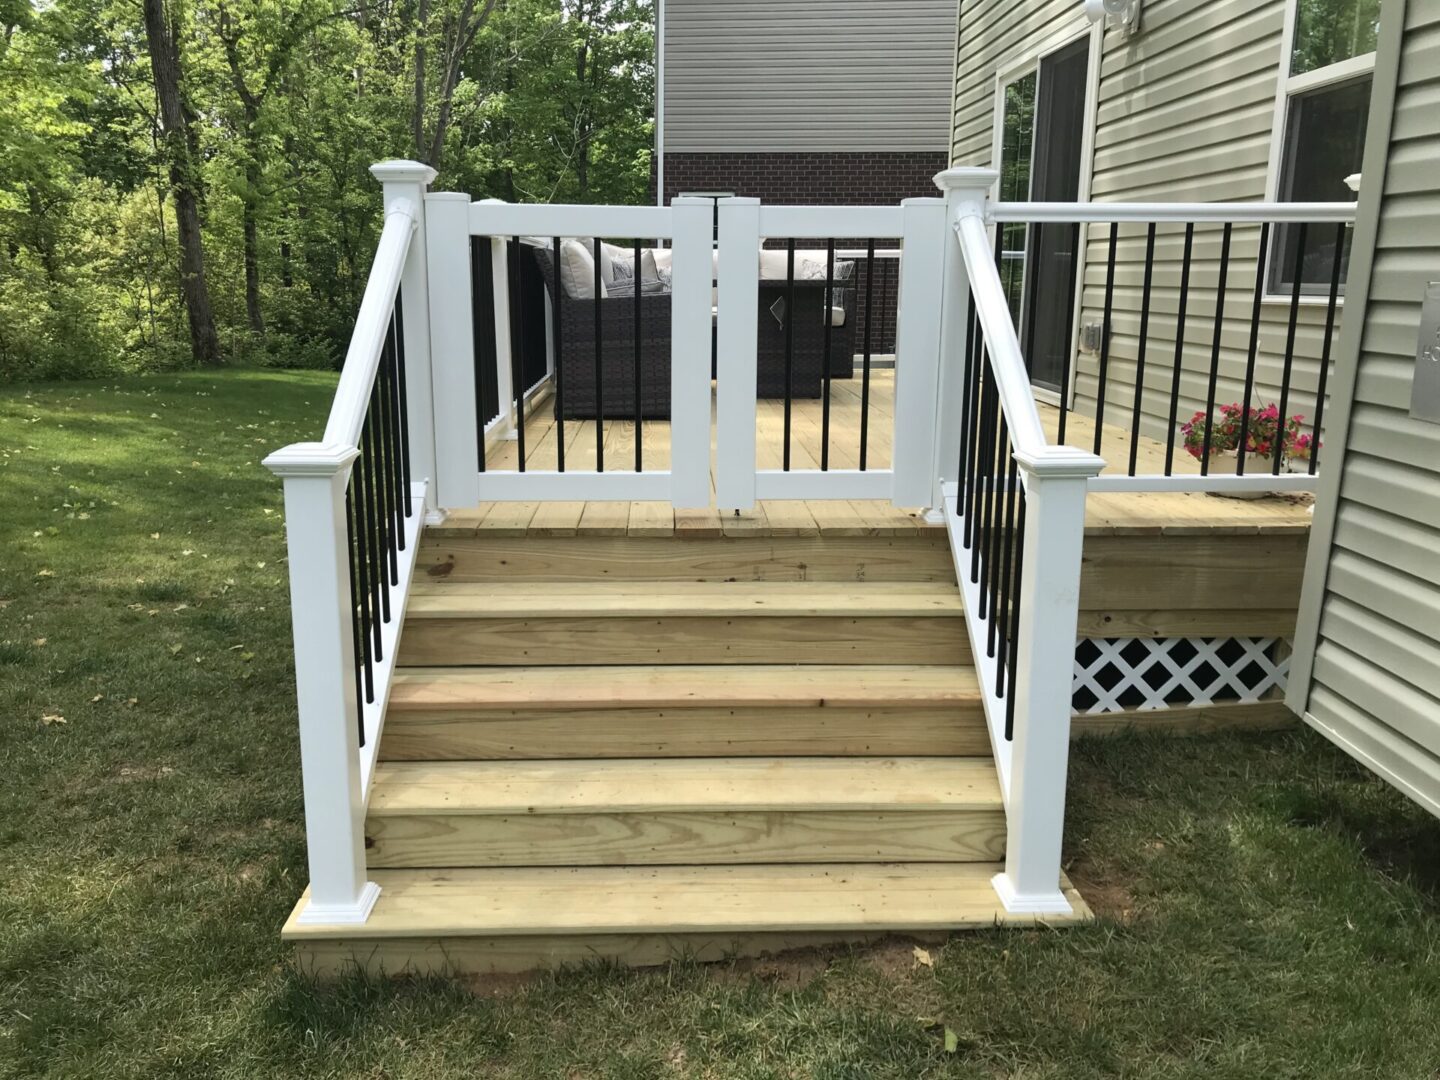 A porch with steps and railings that have been painted white.